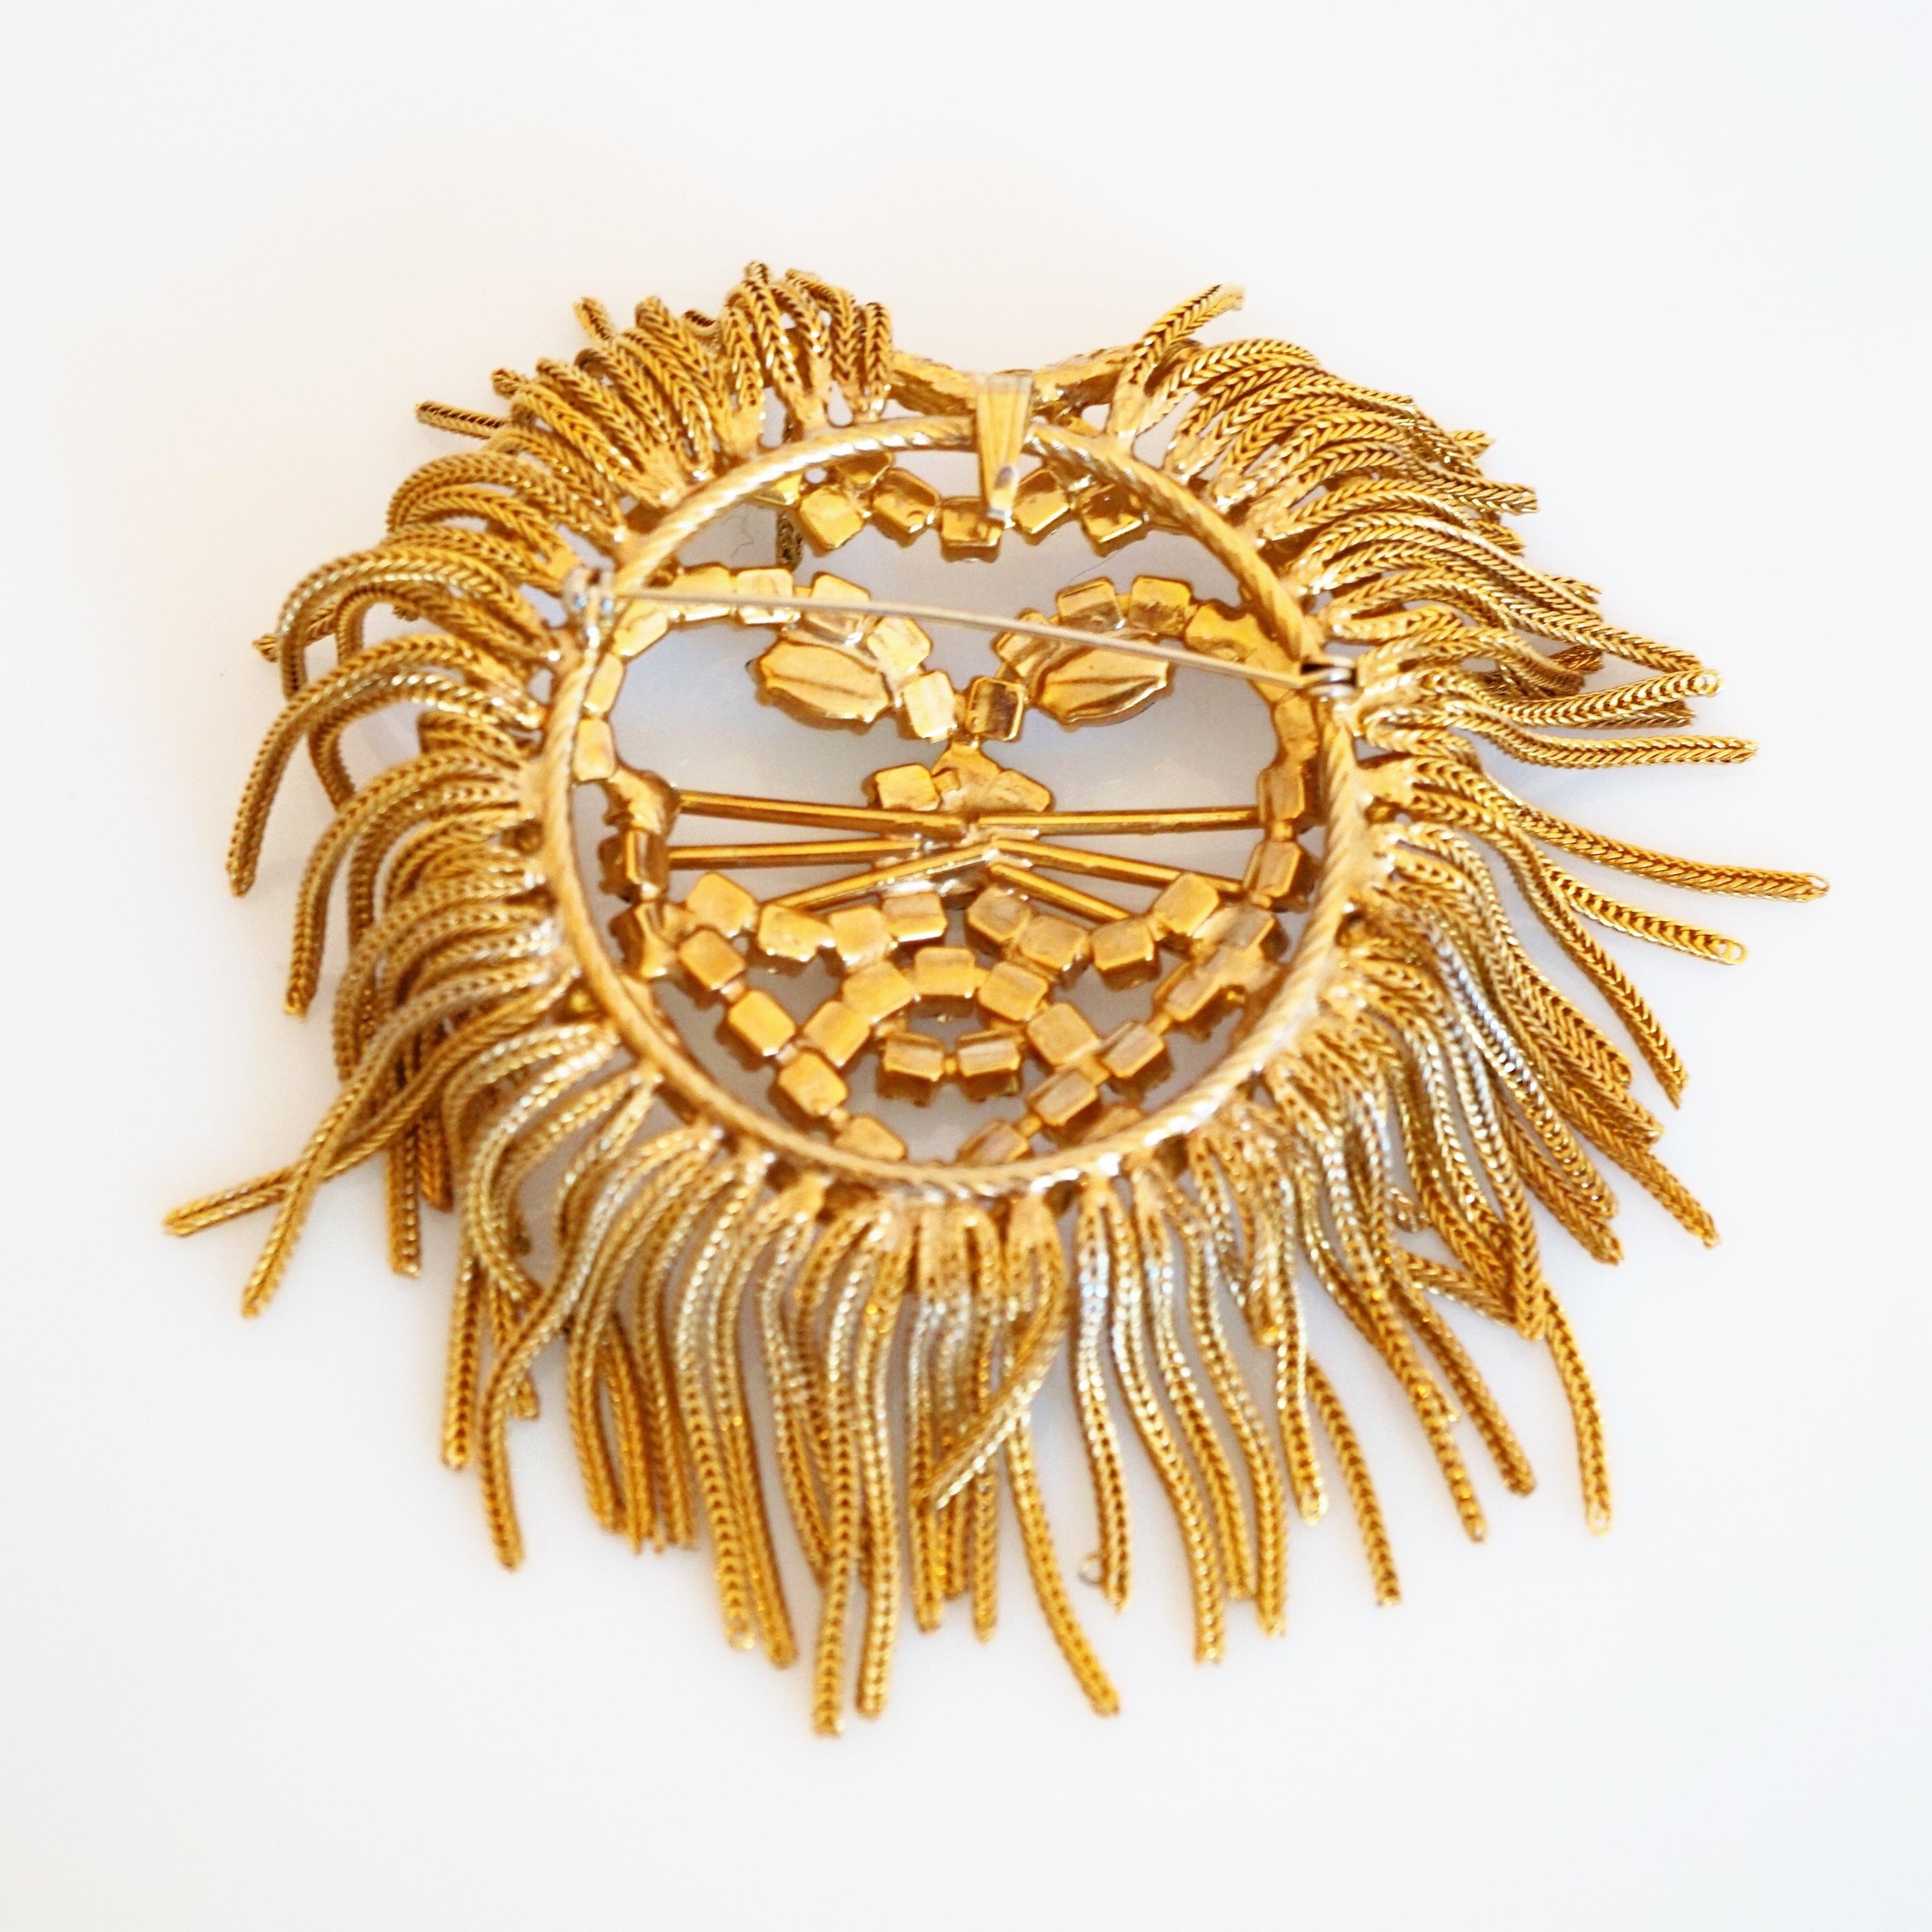 Lion Brooch With Rhinestones and Gold Chain Fringe By Dominique, 1960s In Good Condition For Sale In McKinney, TX